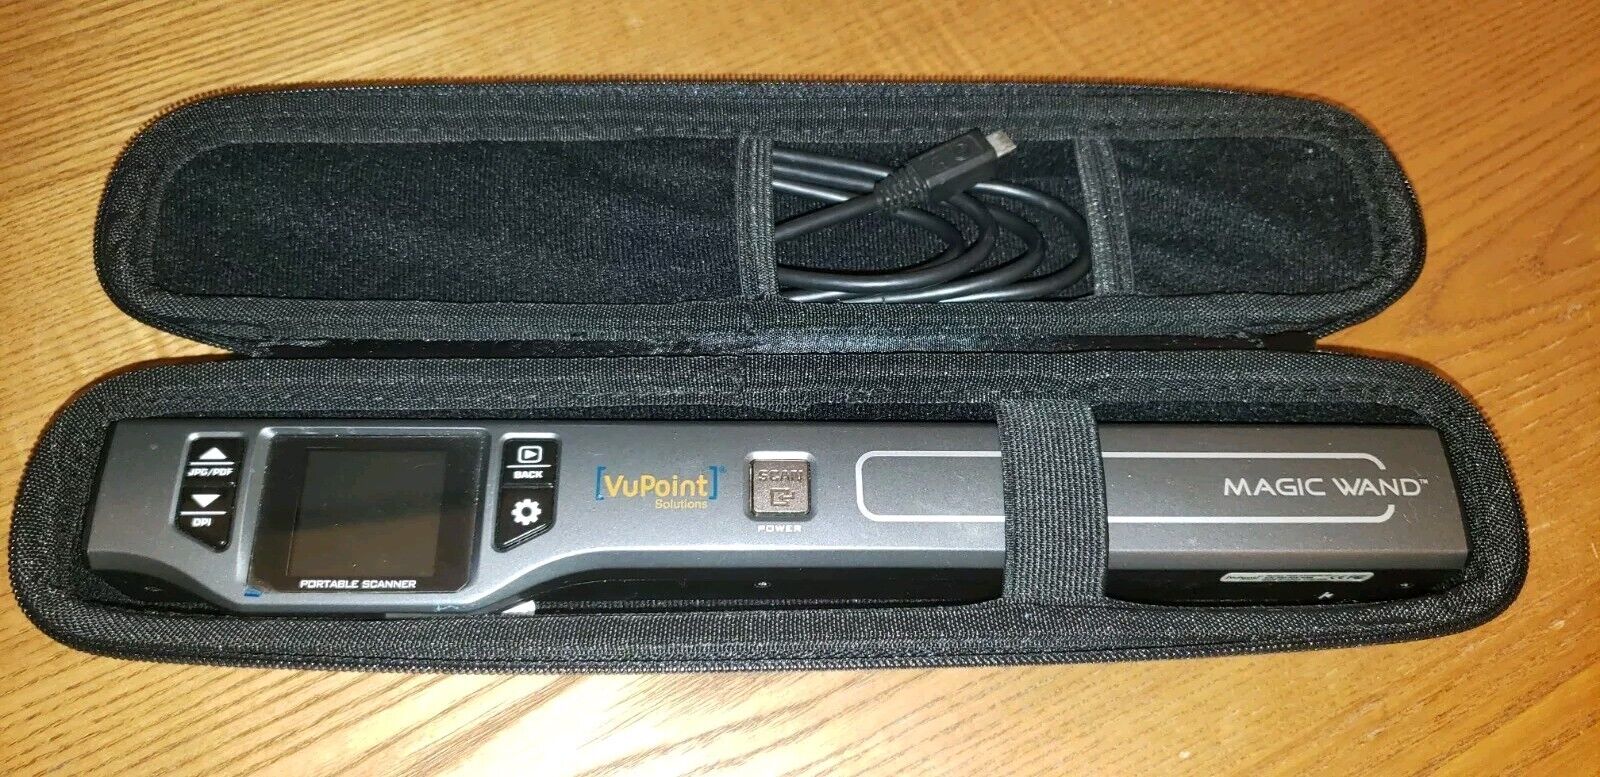 VuPoint Solutions Handheld Magic Wand Portable Scanner, Cable, Case- Nice